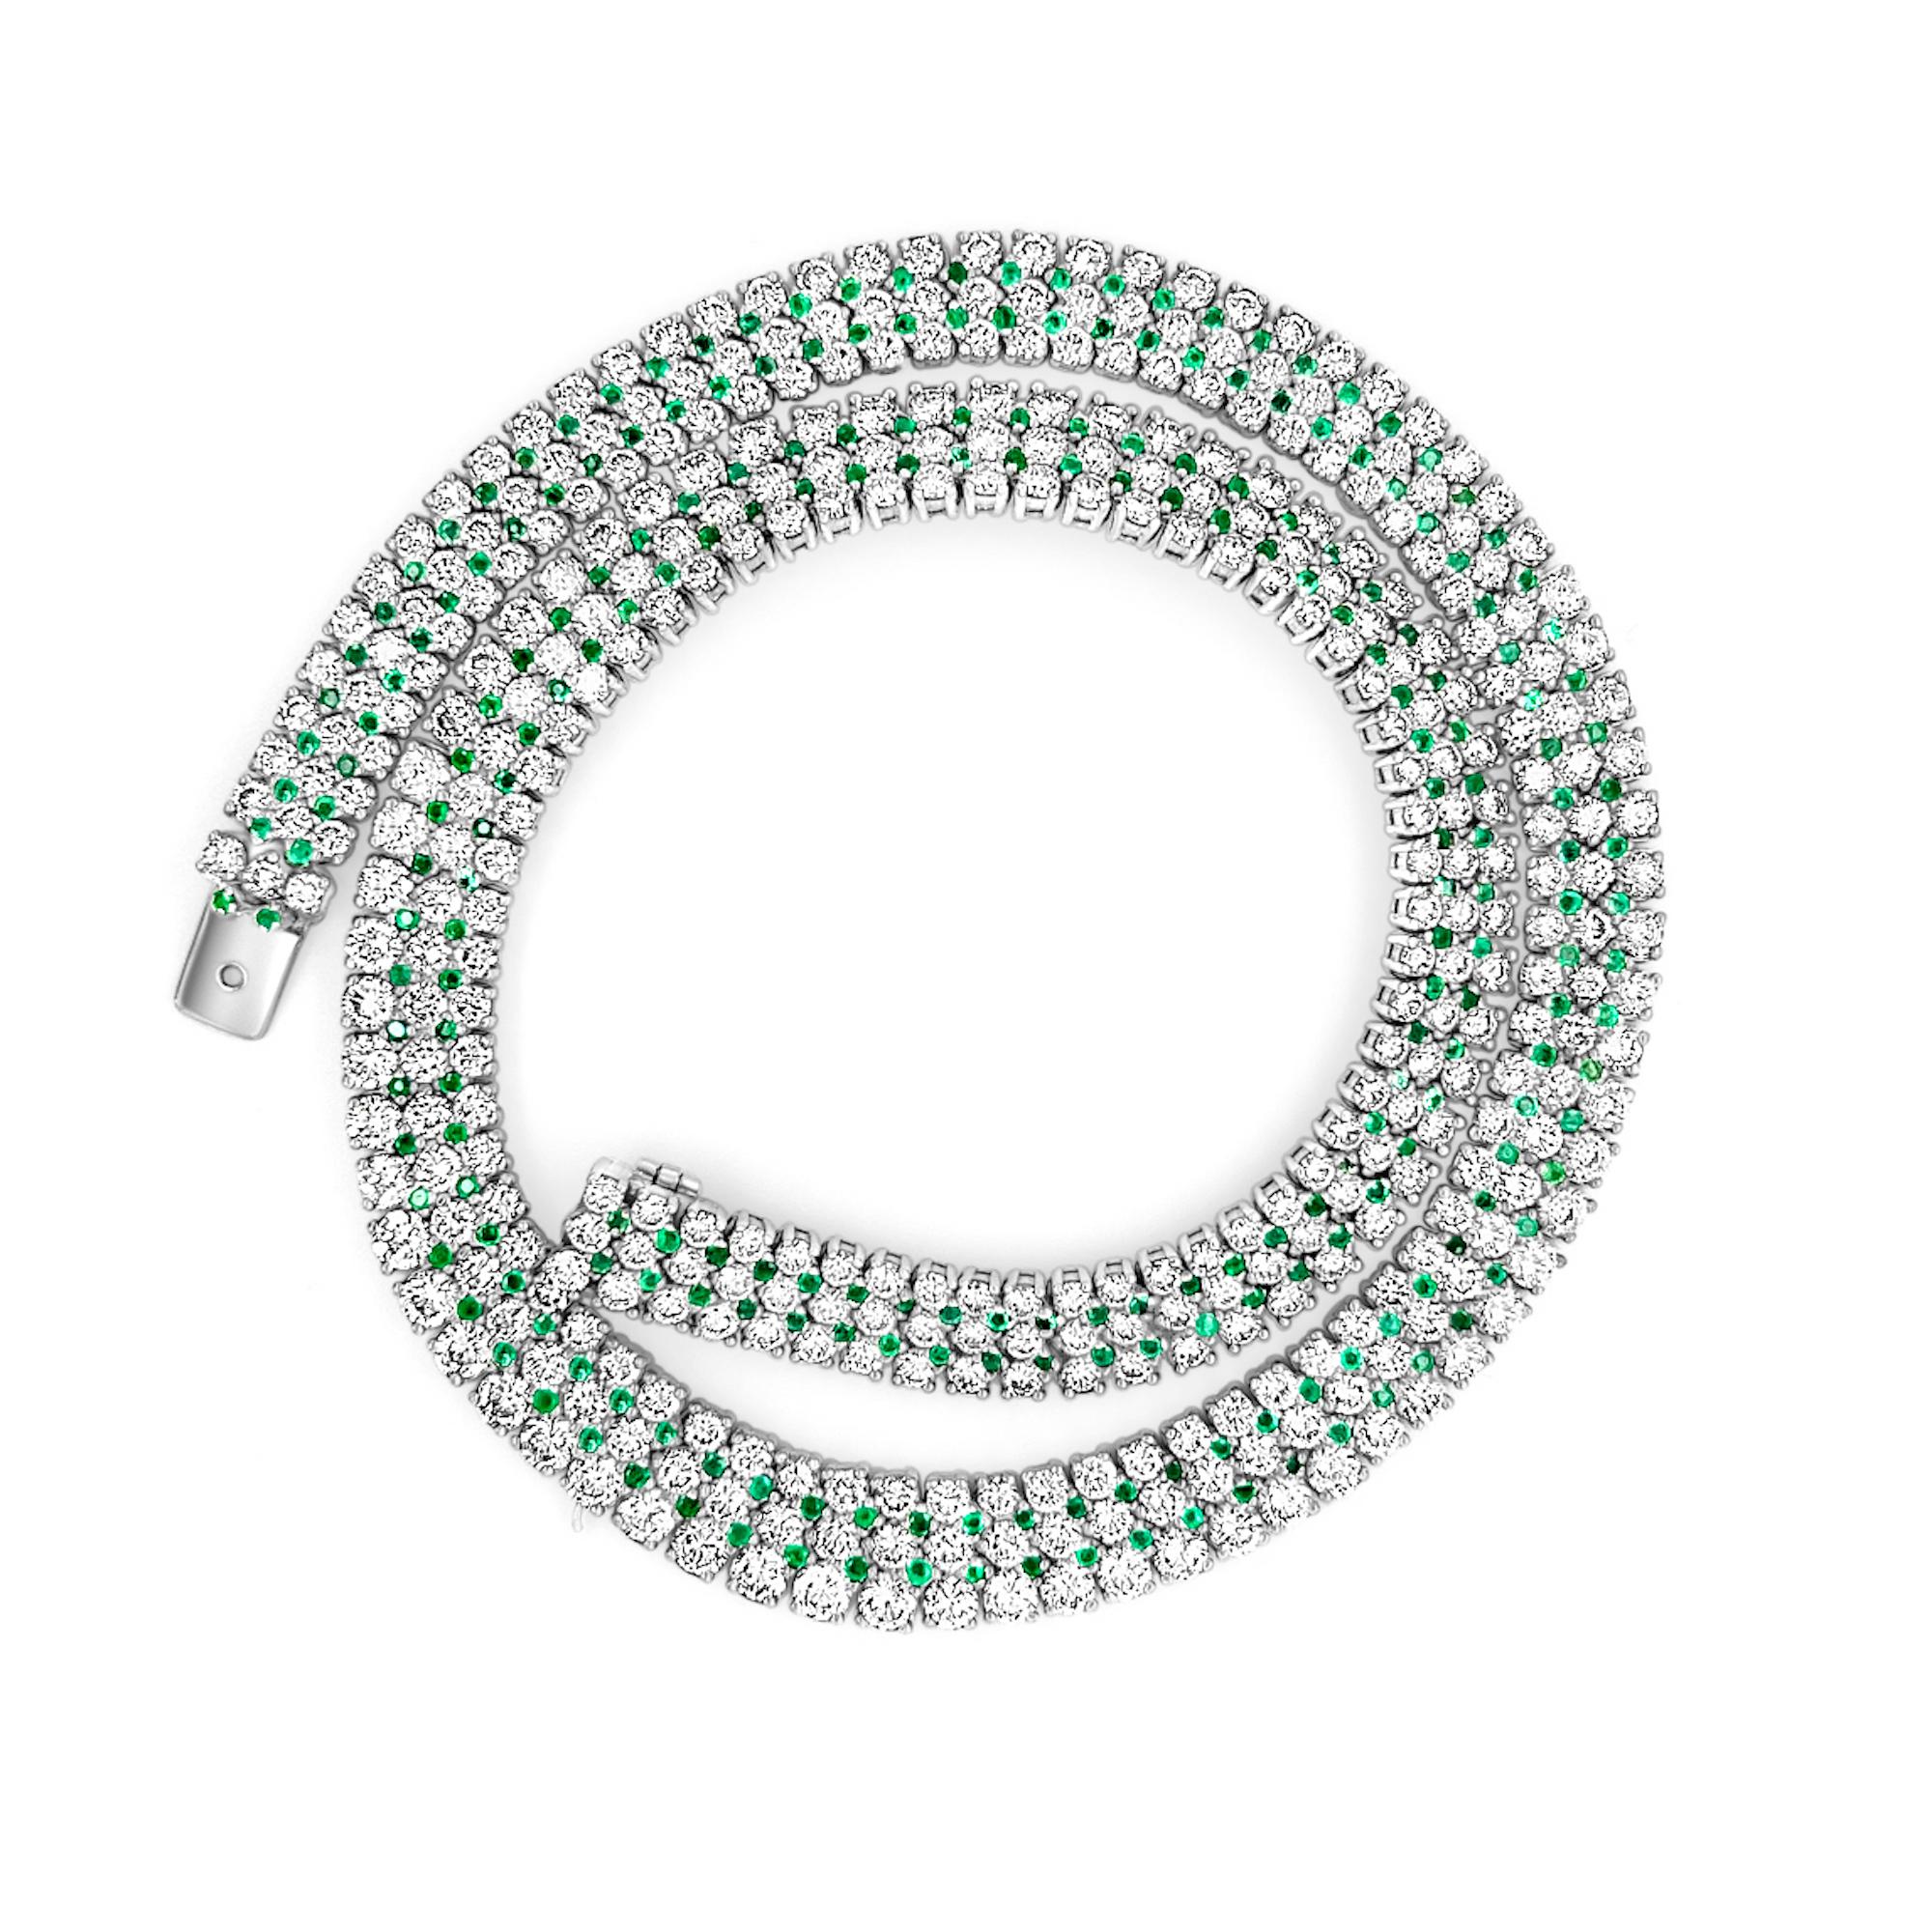 Presenting this magnificent 27-carat diamond and emerald pave choker. Set in 18 karat white gold. This hand-made luxury choker features flexible and sturdy tri-links connecting each diamond. The 3 interlocked strands allow for a flexible fit, while